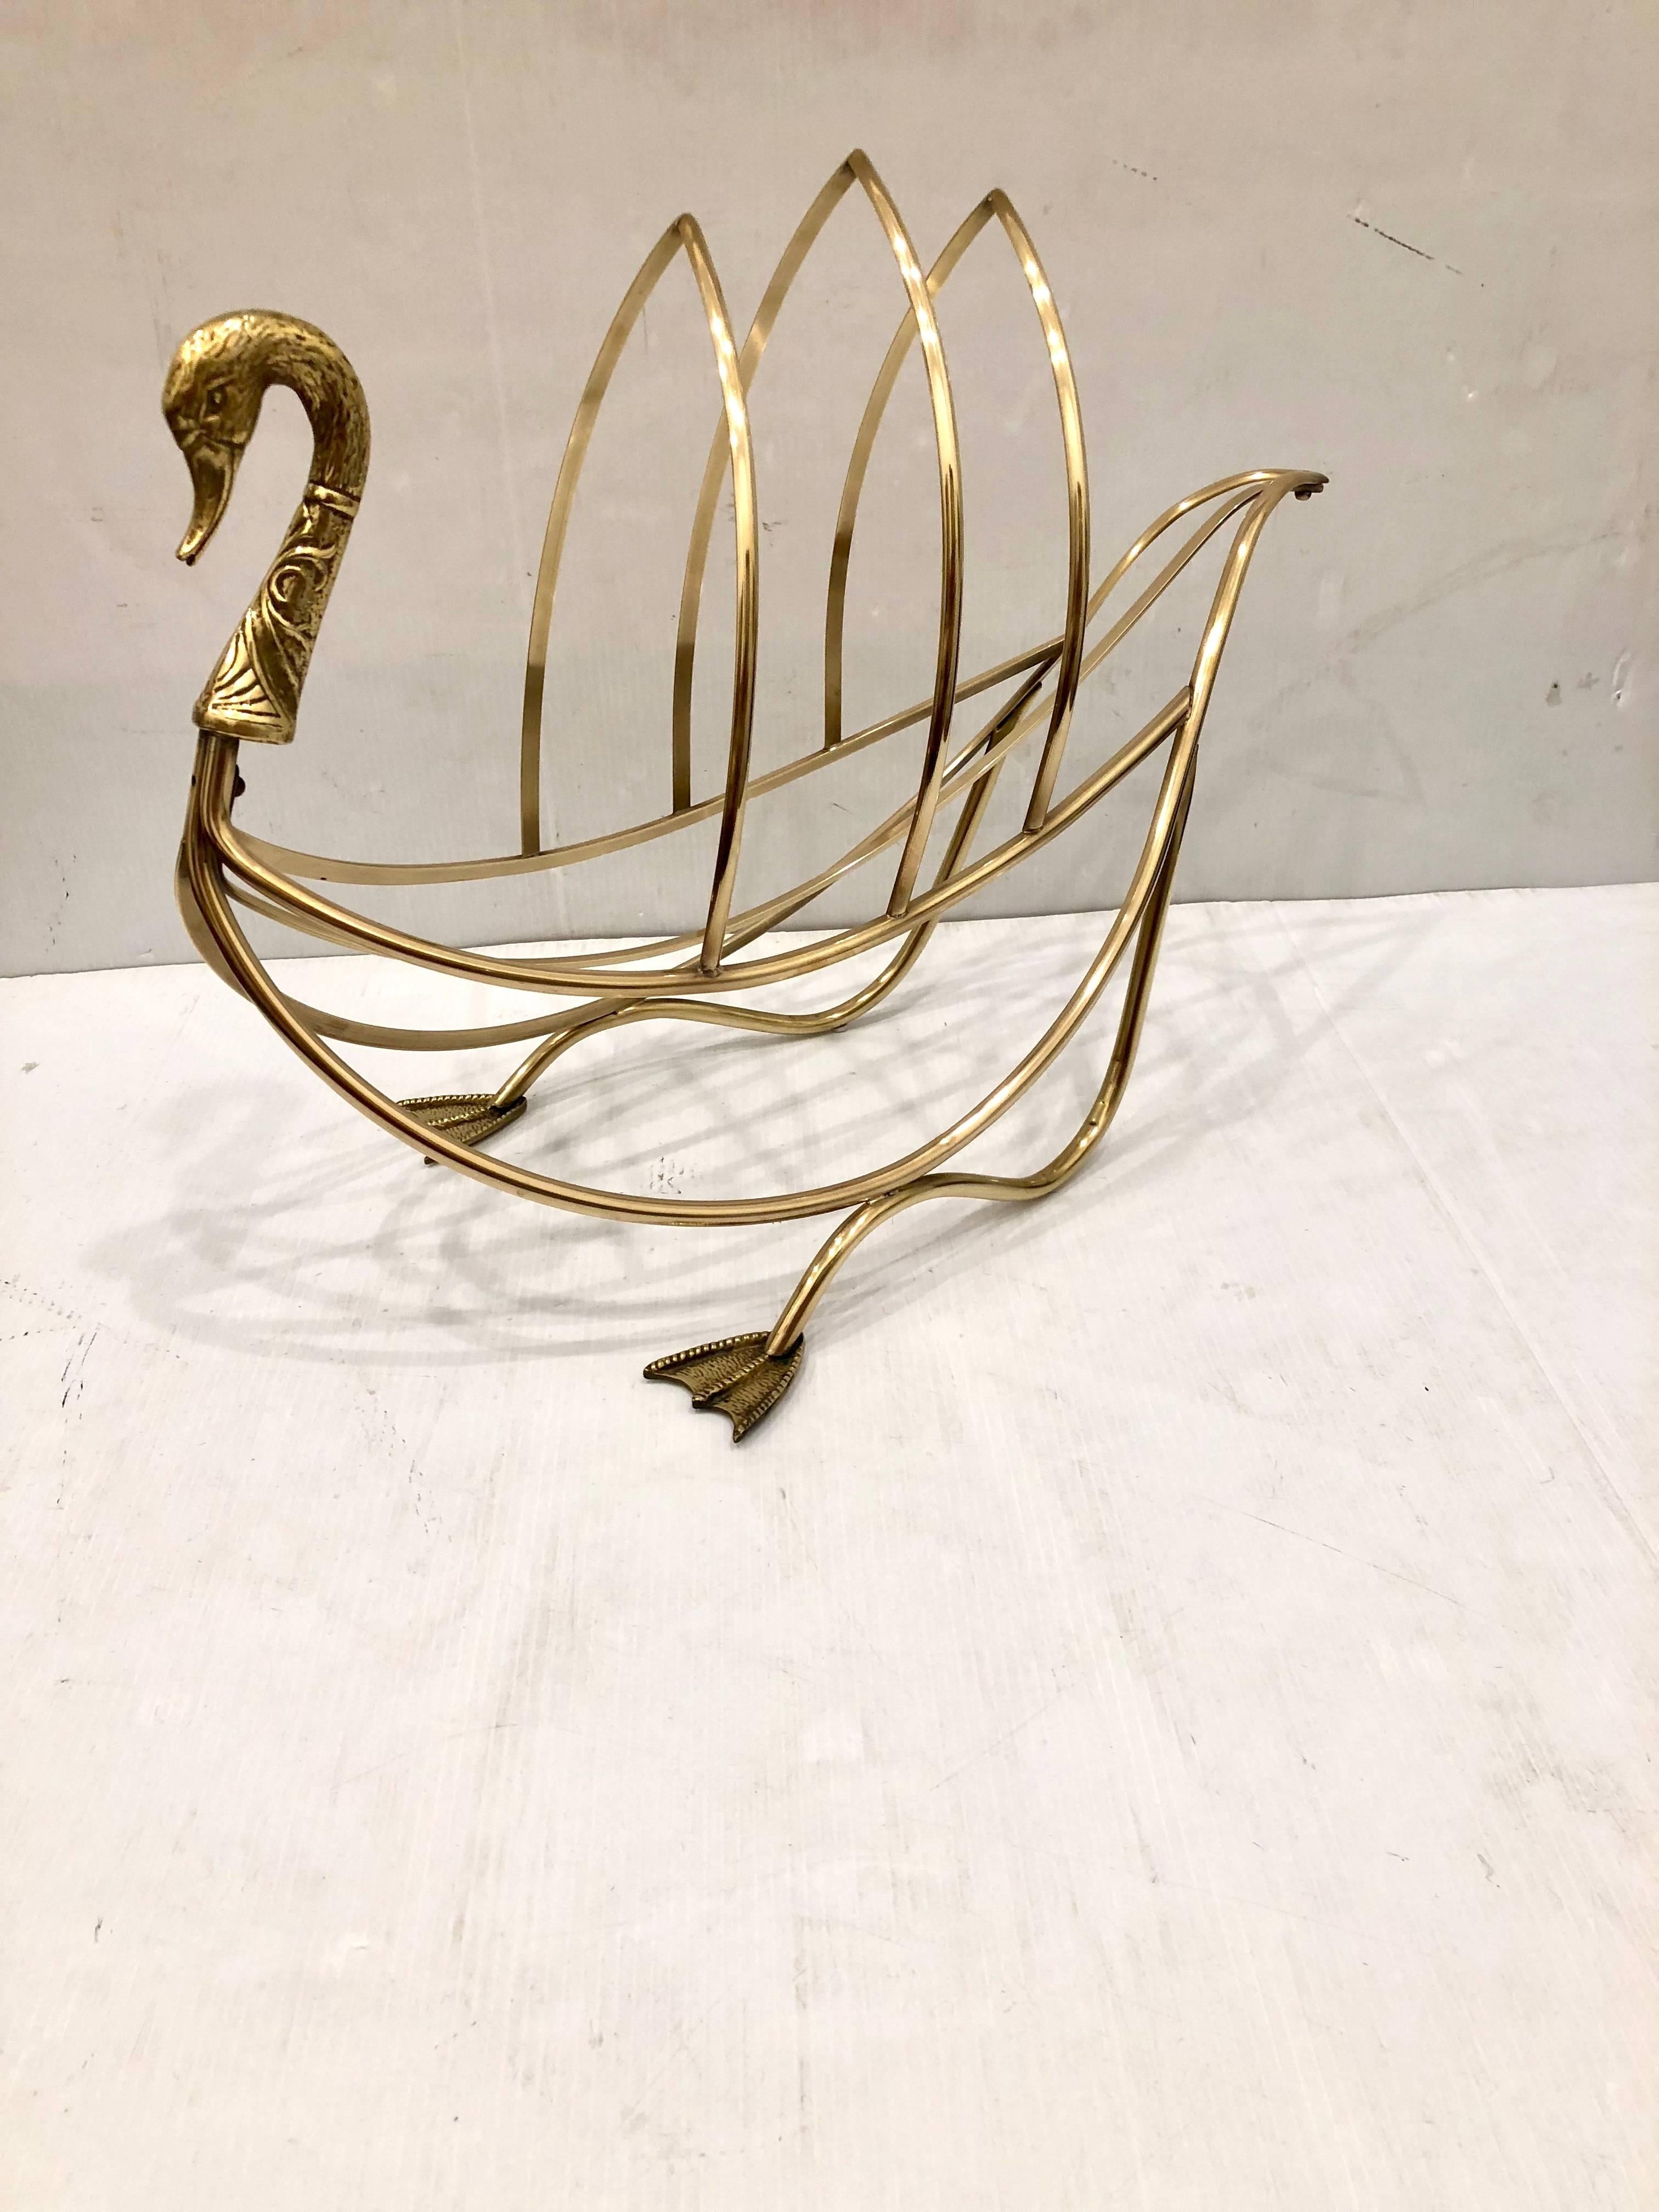 A magazine or newspaper rack in solid polished brass swan with webbed feet and detailed brass neck and head. Made in Italy. In the manner of Parisian decorating firm Jansen.